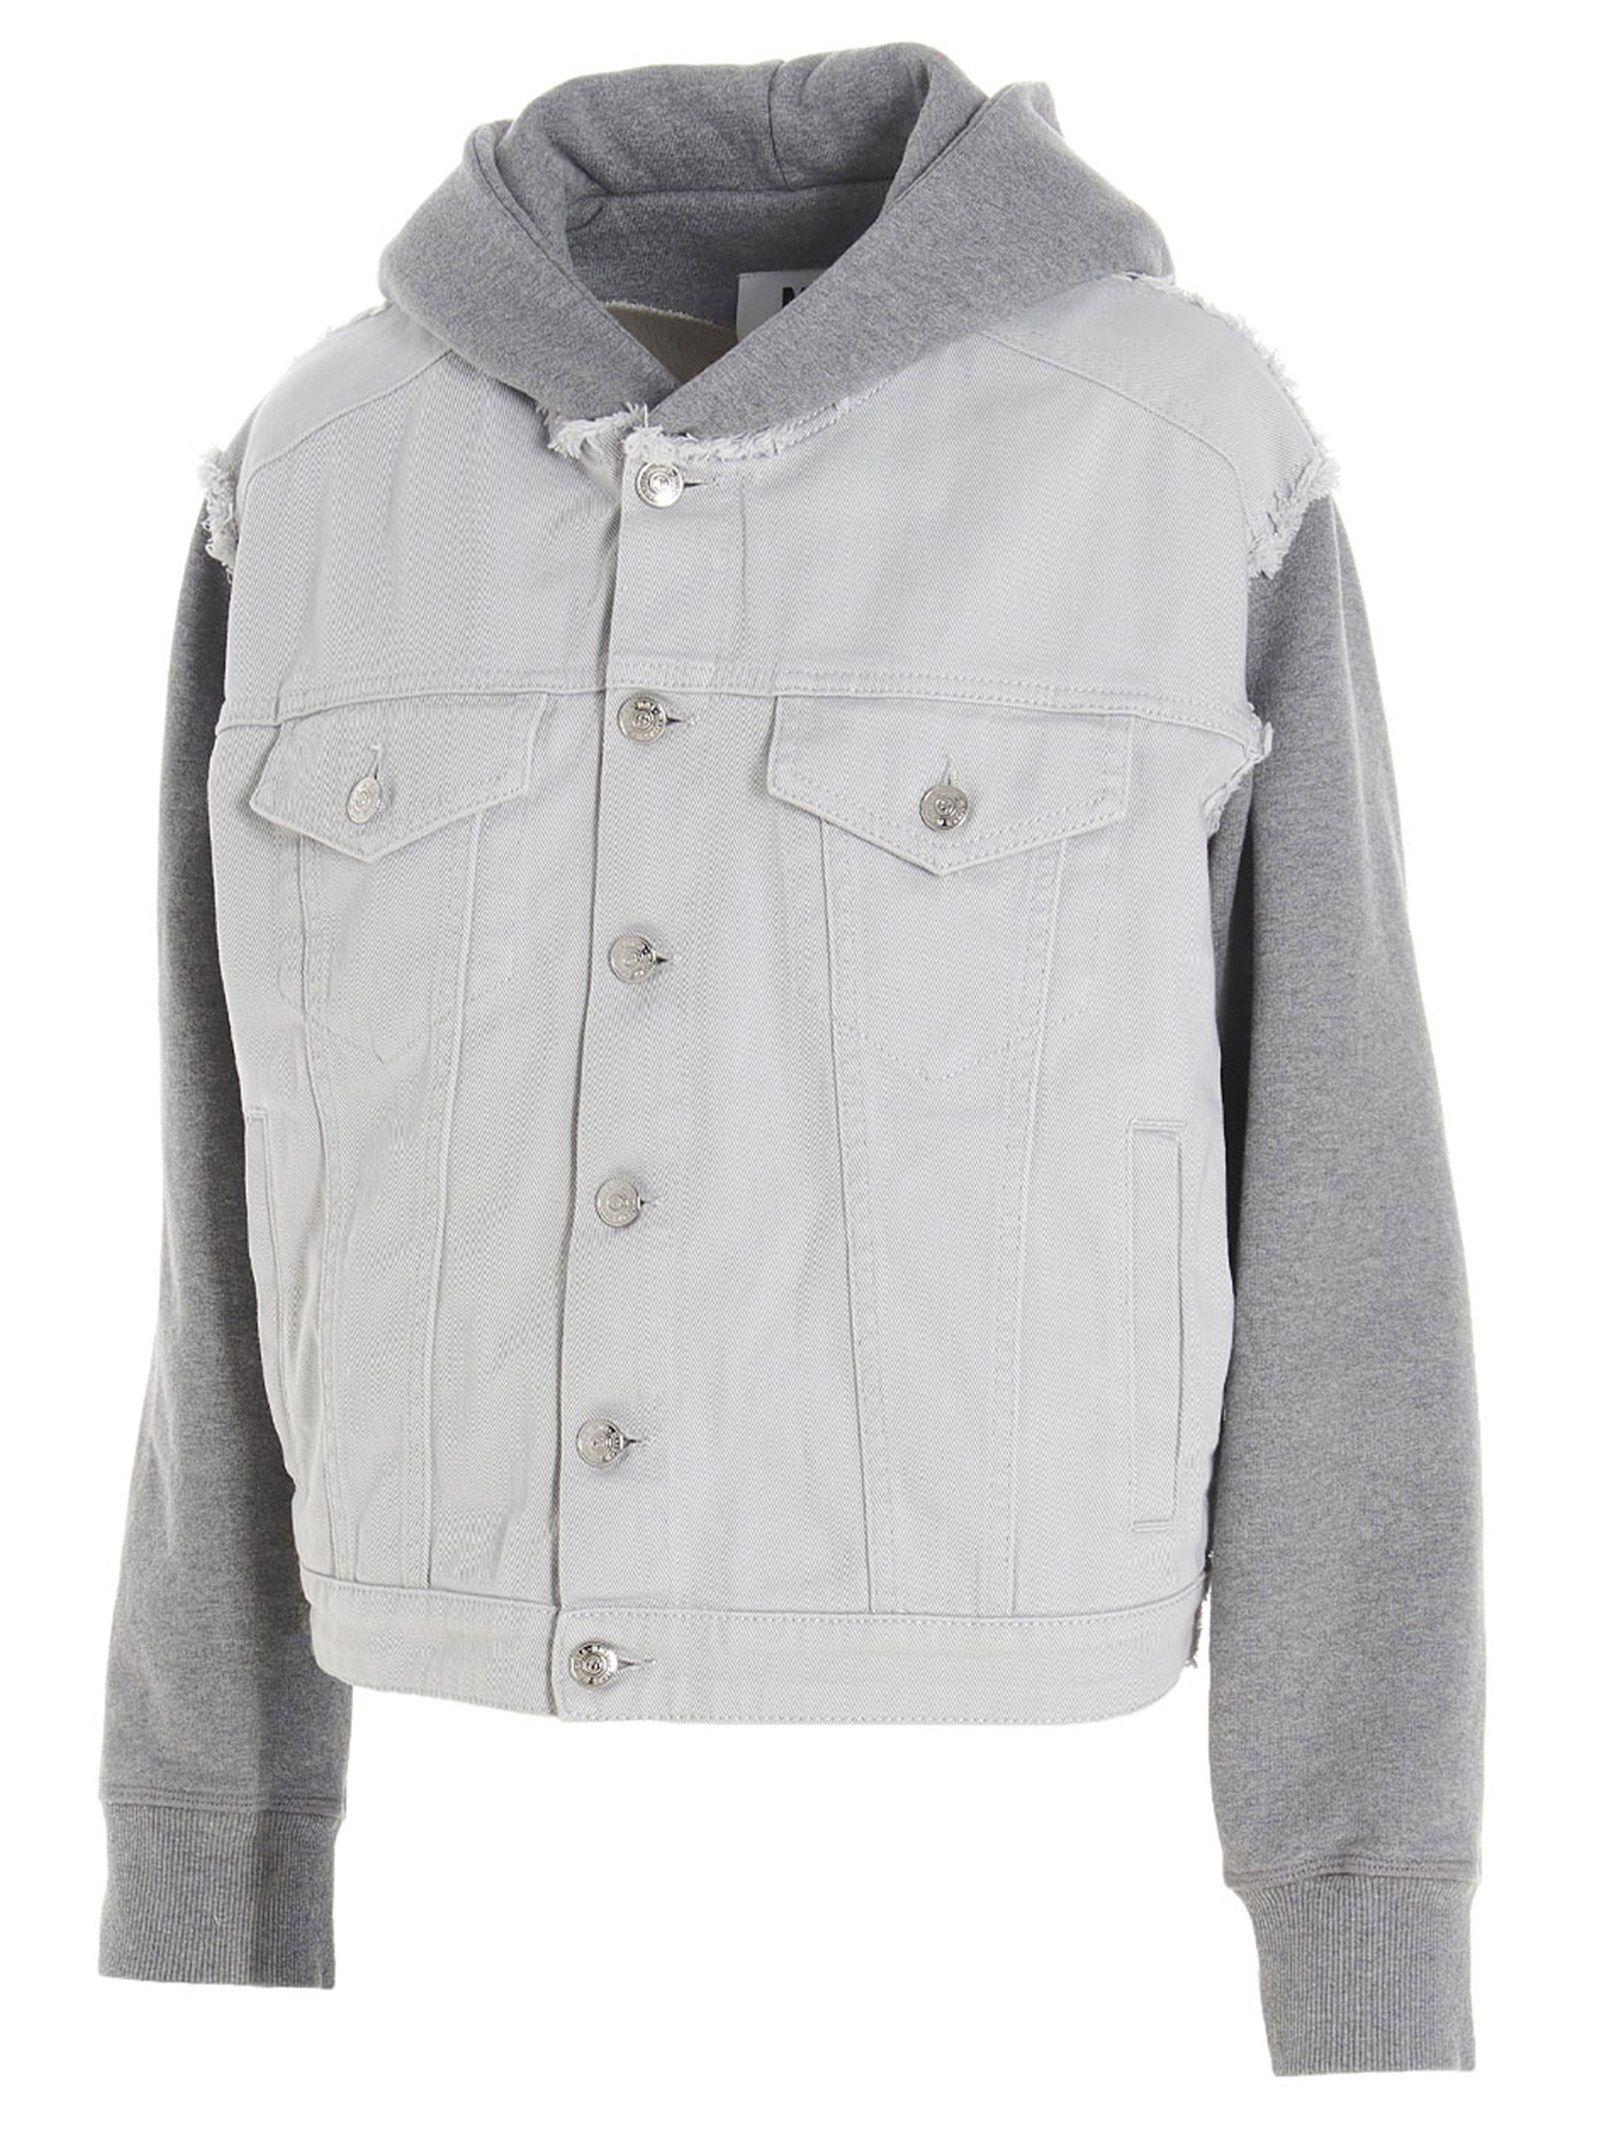 Maison Margiela Cotton Other Materials Outerwear Jacket in Grey (Gray ...